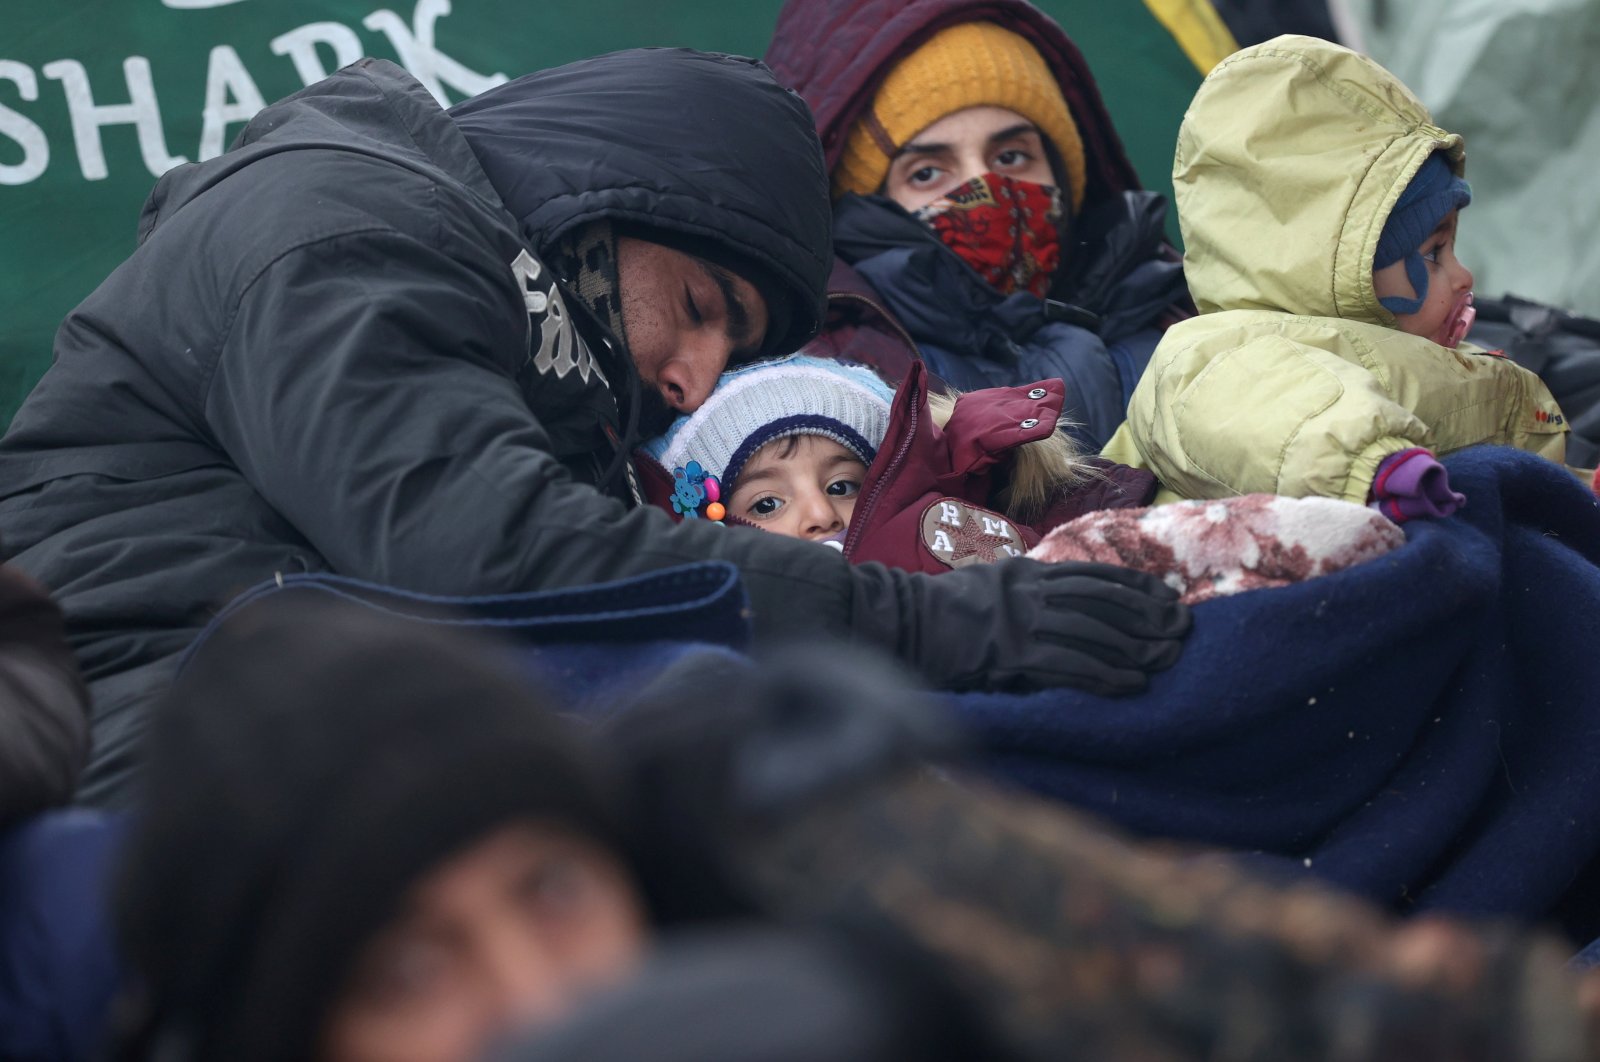 Migrants rest next to a tent set up at the Bruzgi-Kuznica Bialostocka border crossing in the Grodno Region, Belarus, Nov. 15, 2021. (Reuters Photo)